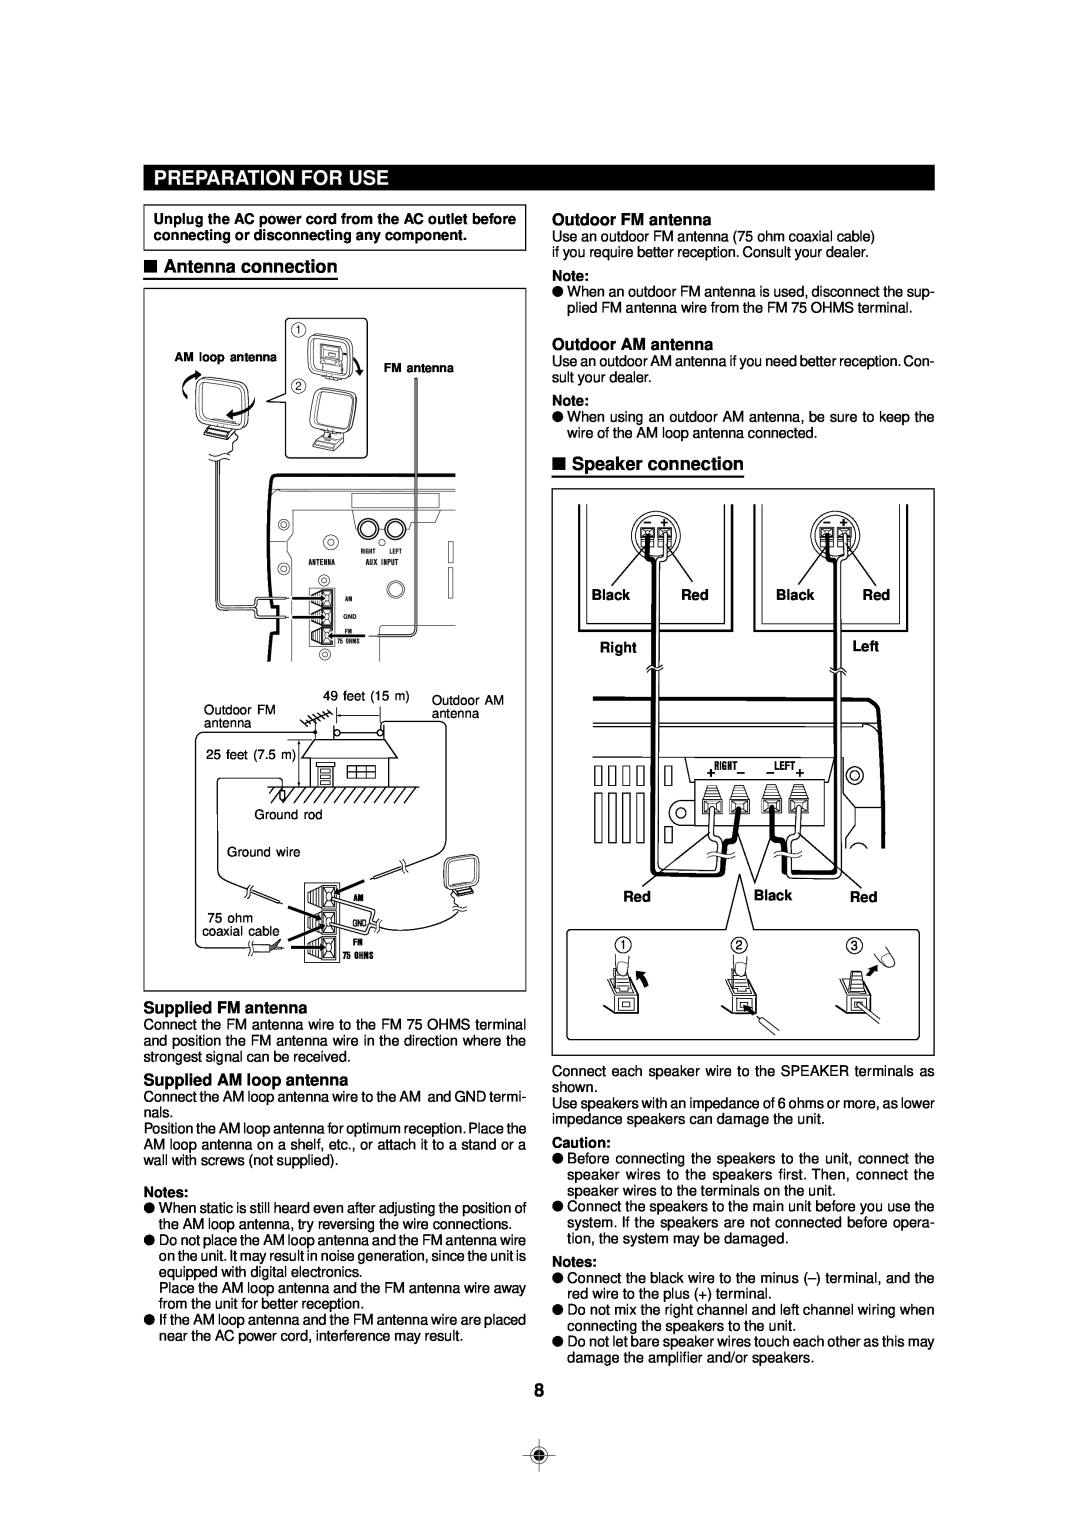 Sharp MD-MX30 MD operation manual Preparation For Use, Antenna connection, Speaker connection 